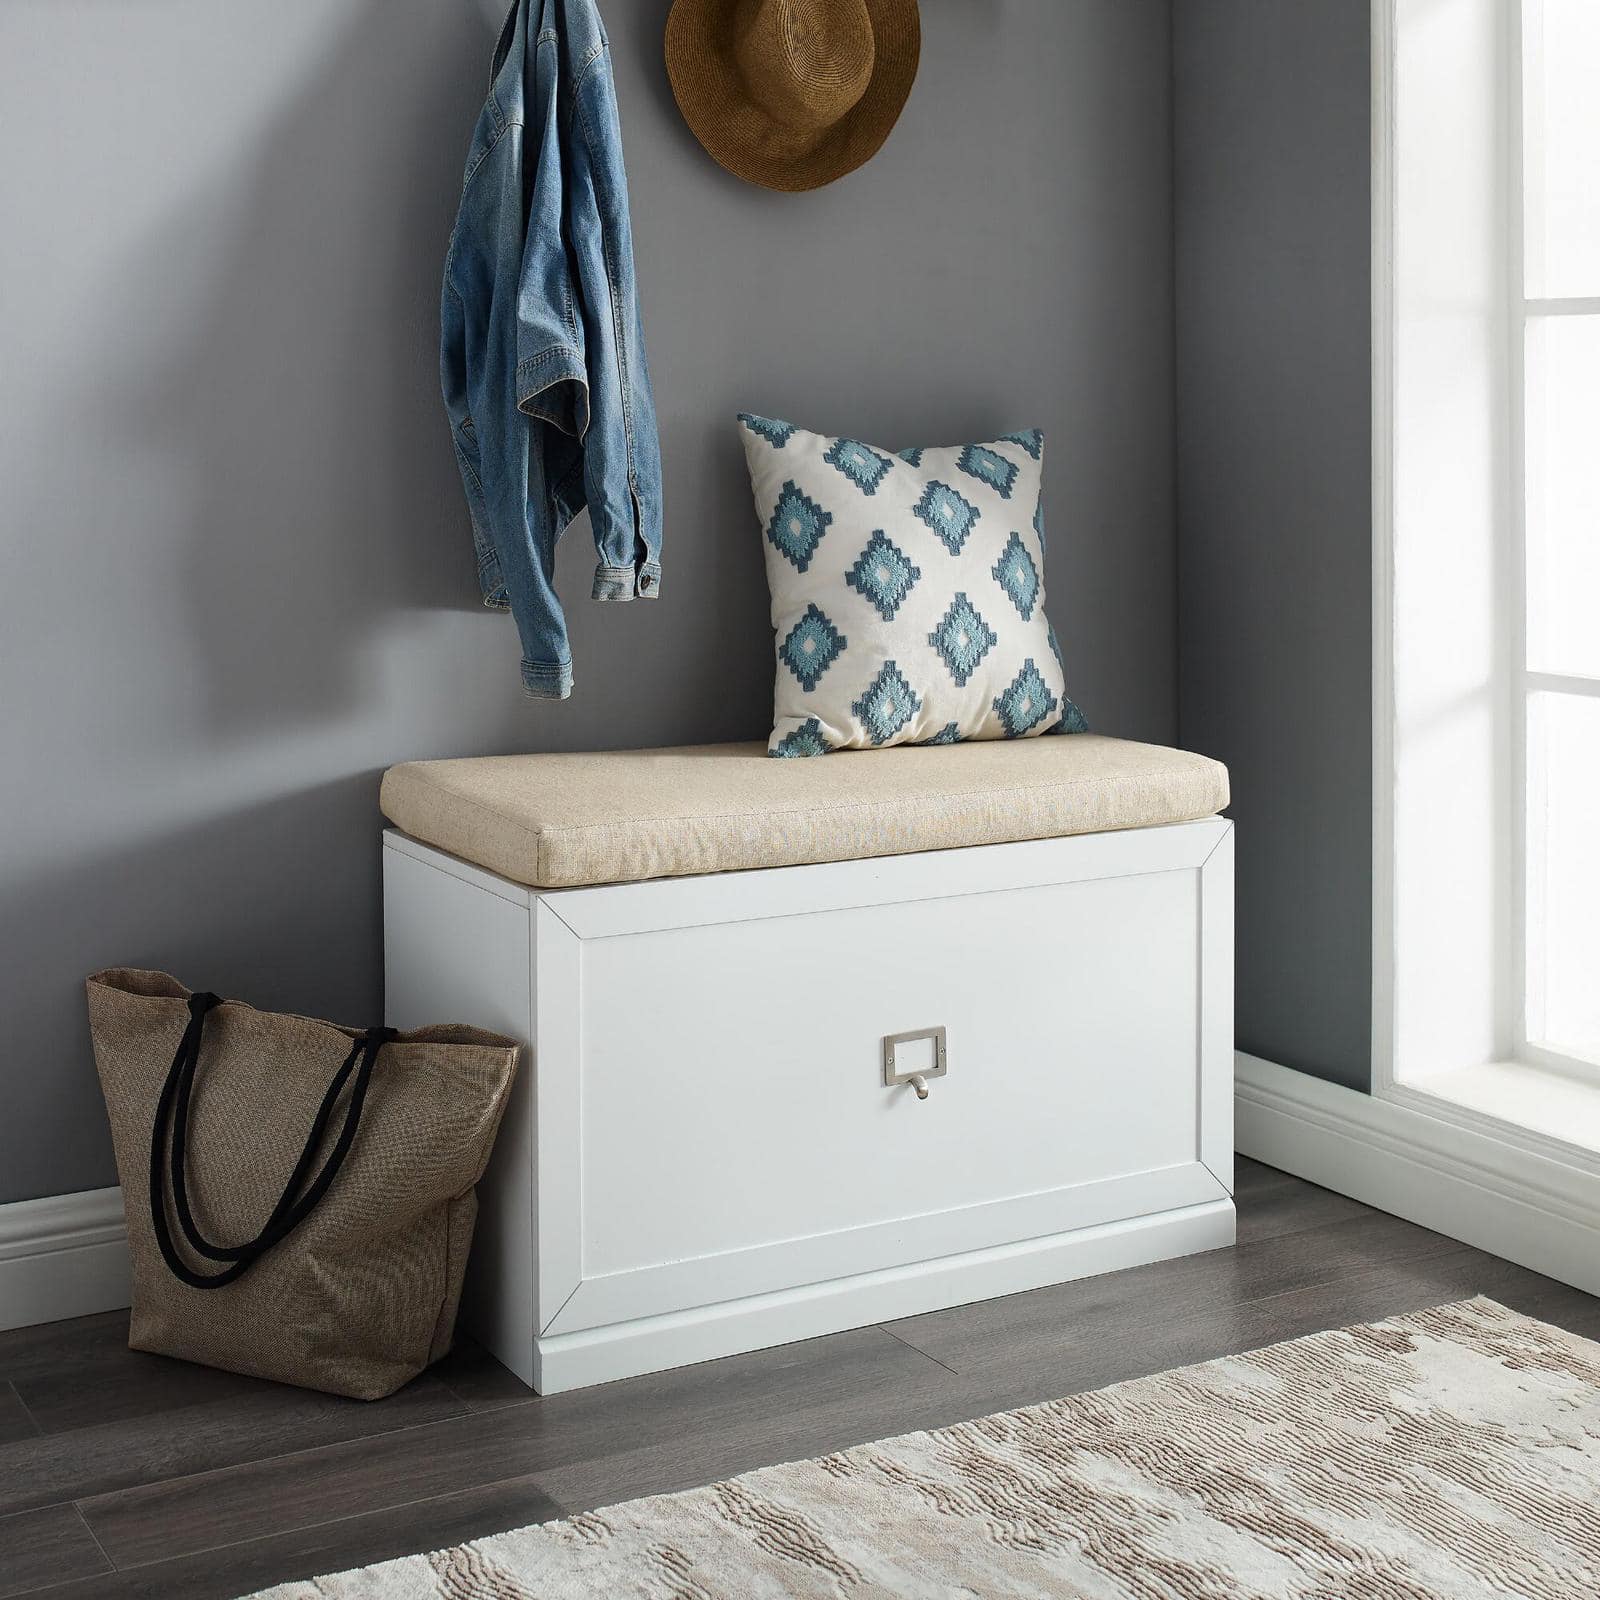 Try a Cushioned Bench with Solo Drawer